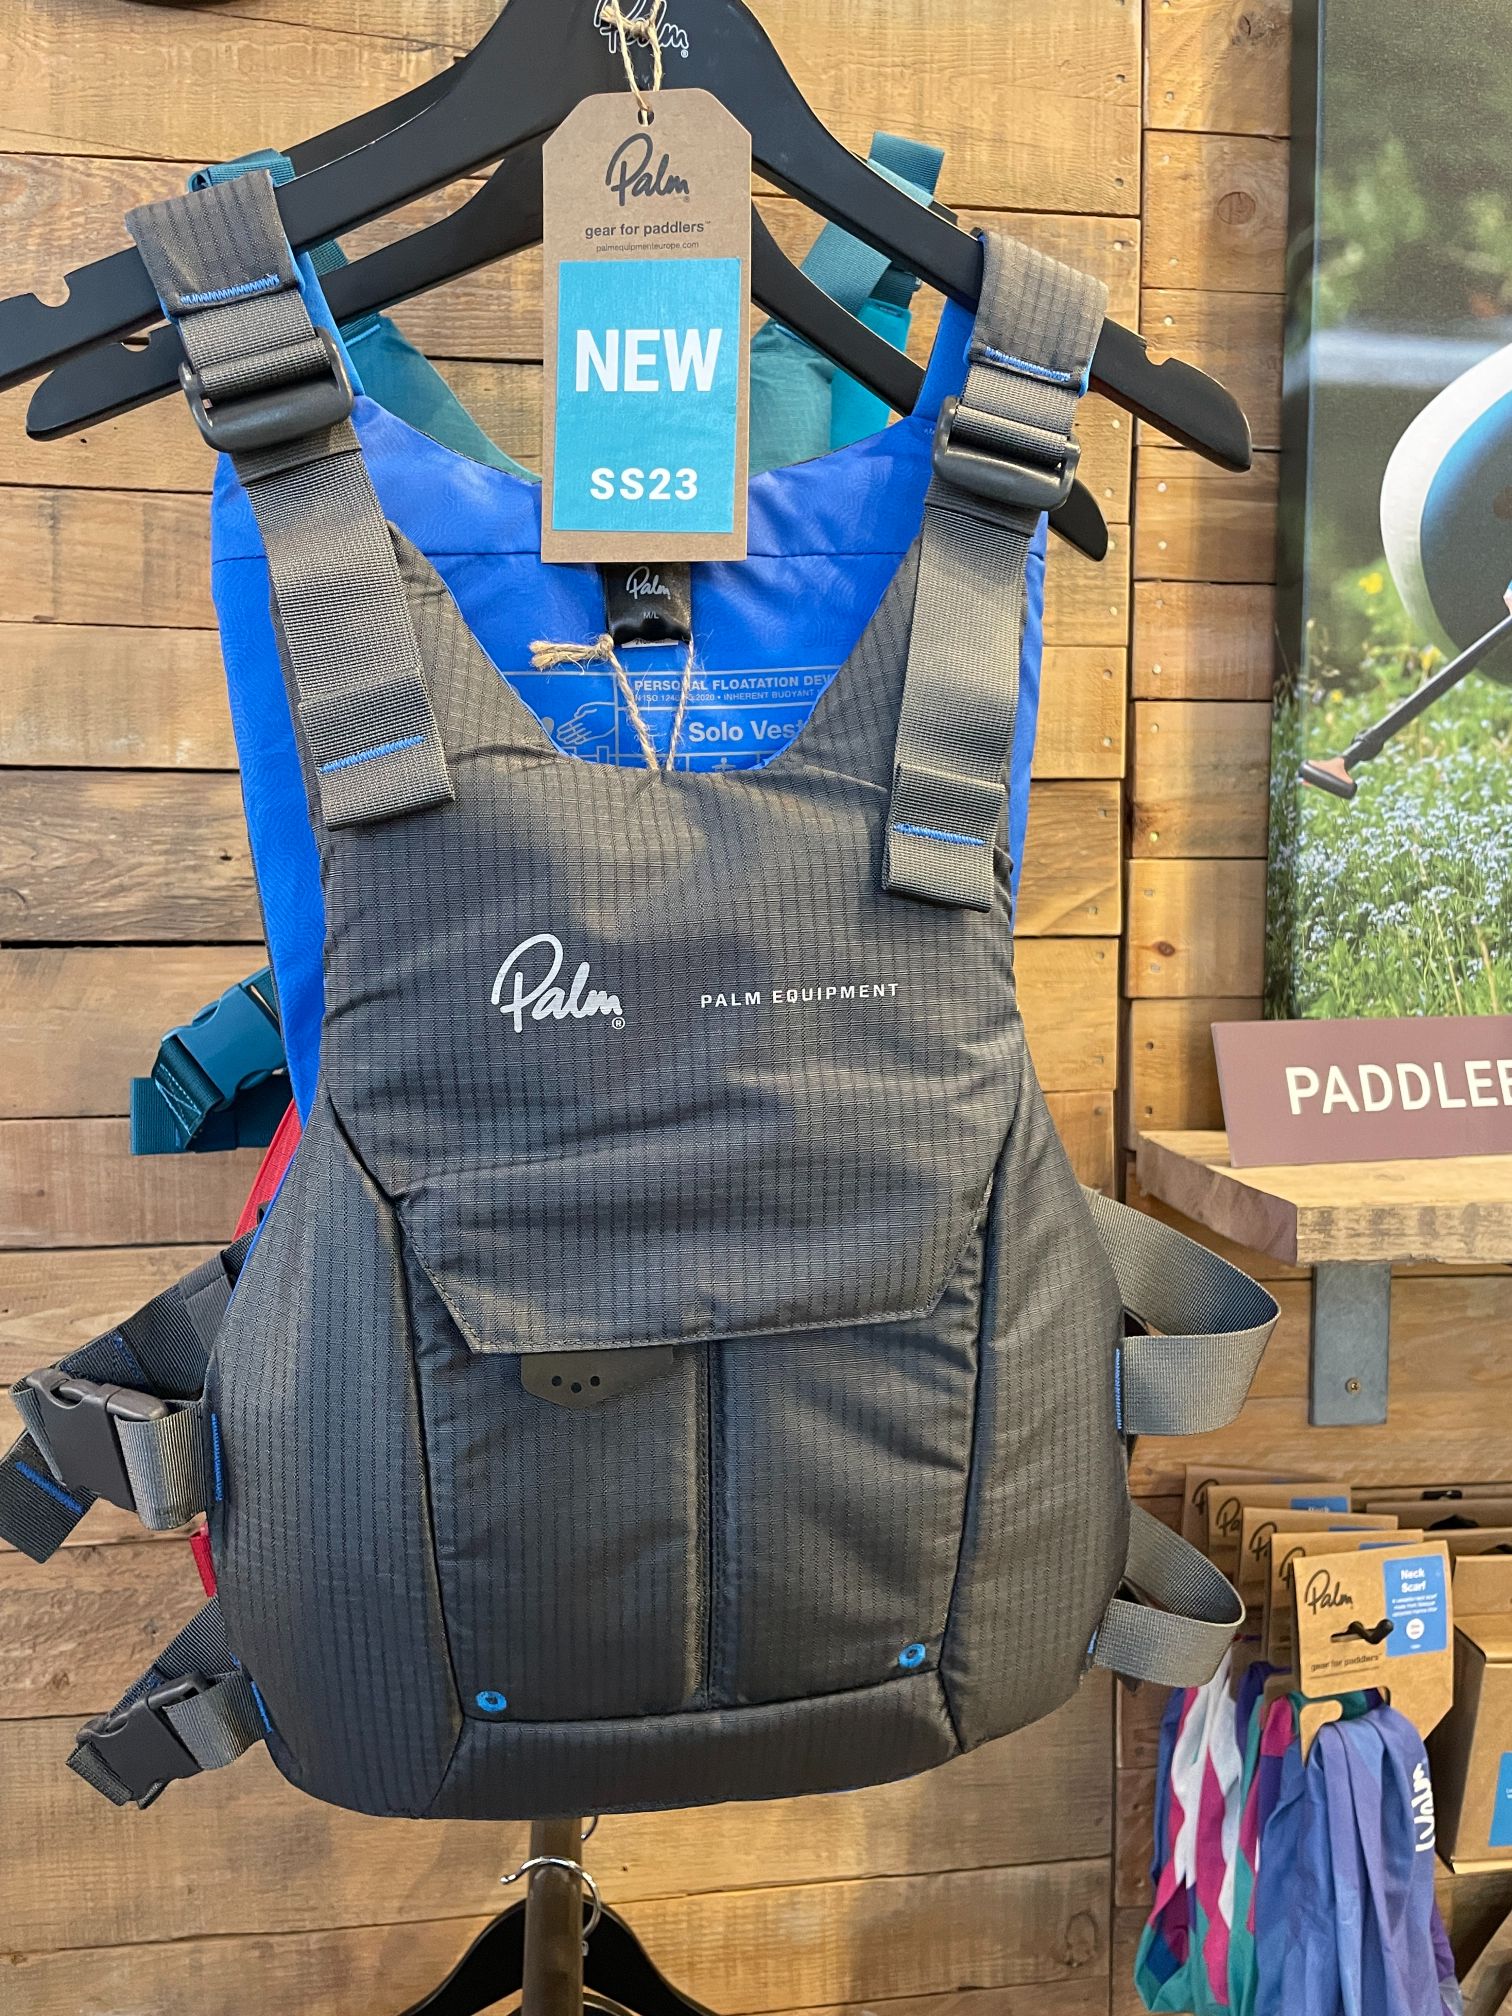 Palm’s new Solo Vest is designed for SUP